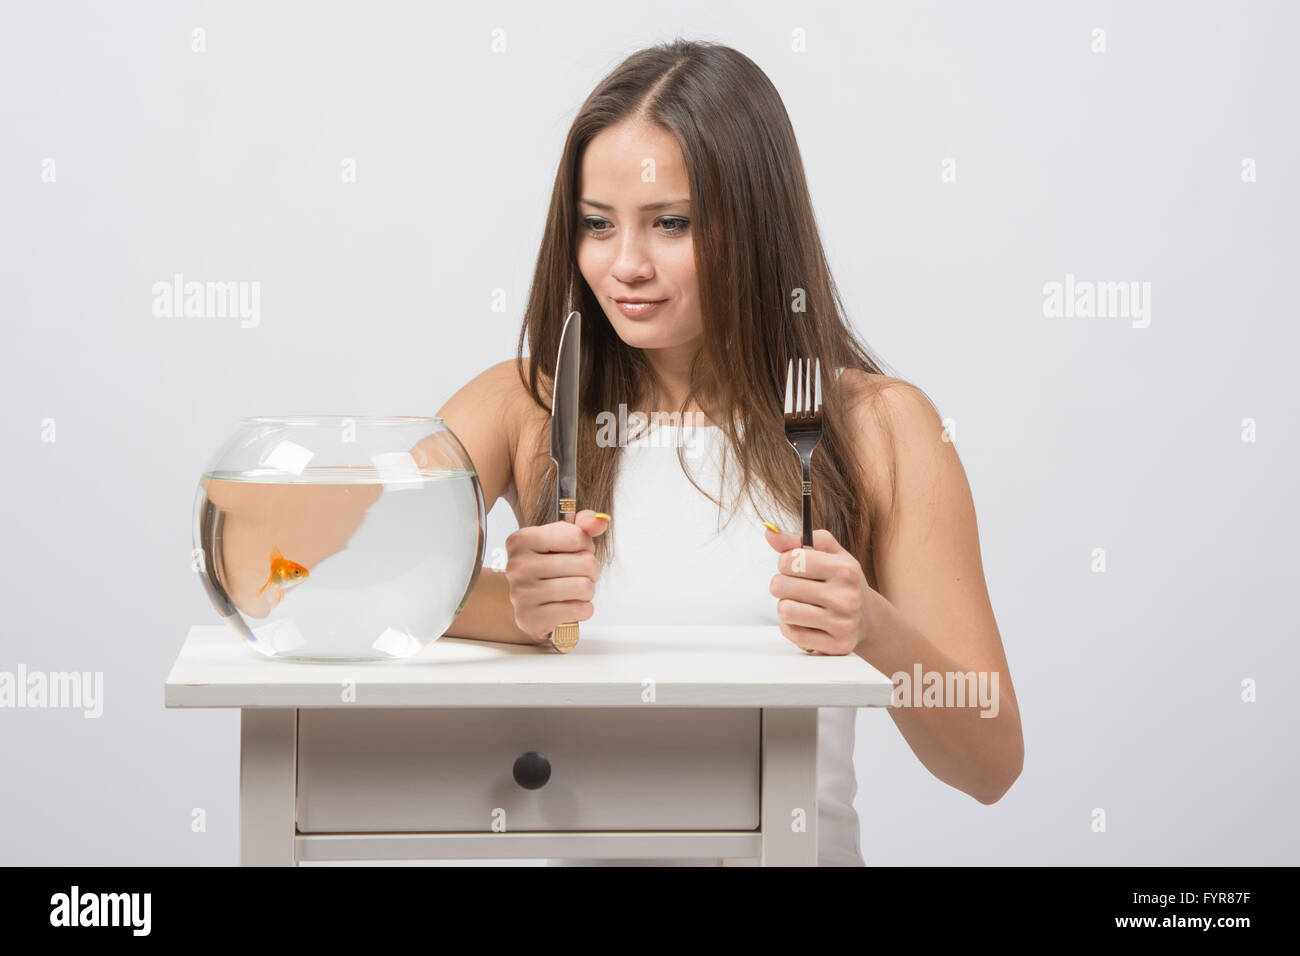 Girl holding knife and fork in hand and with an appetite for looking at the little goldfish Stock Photo